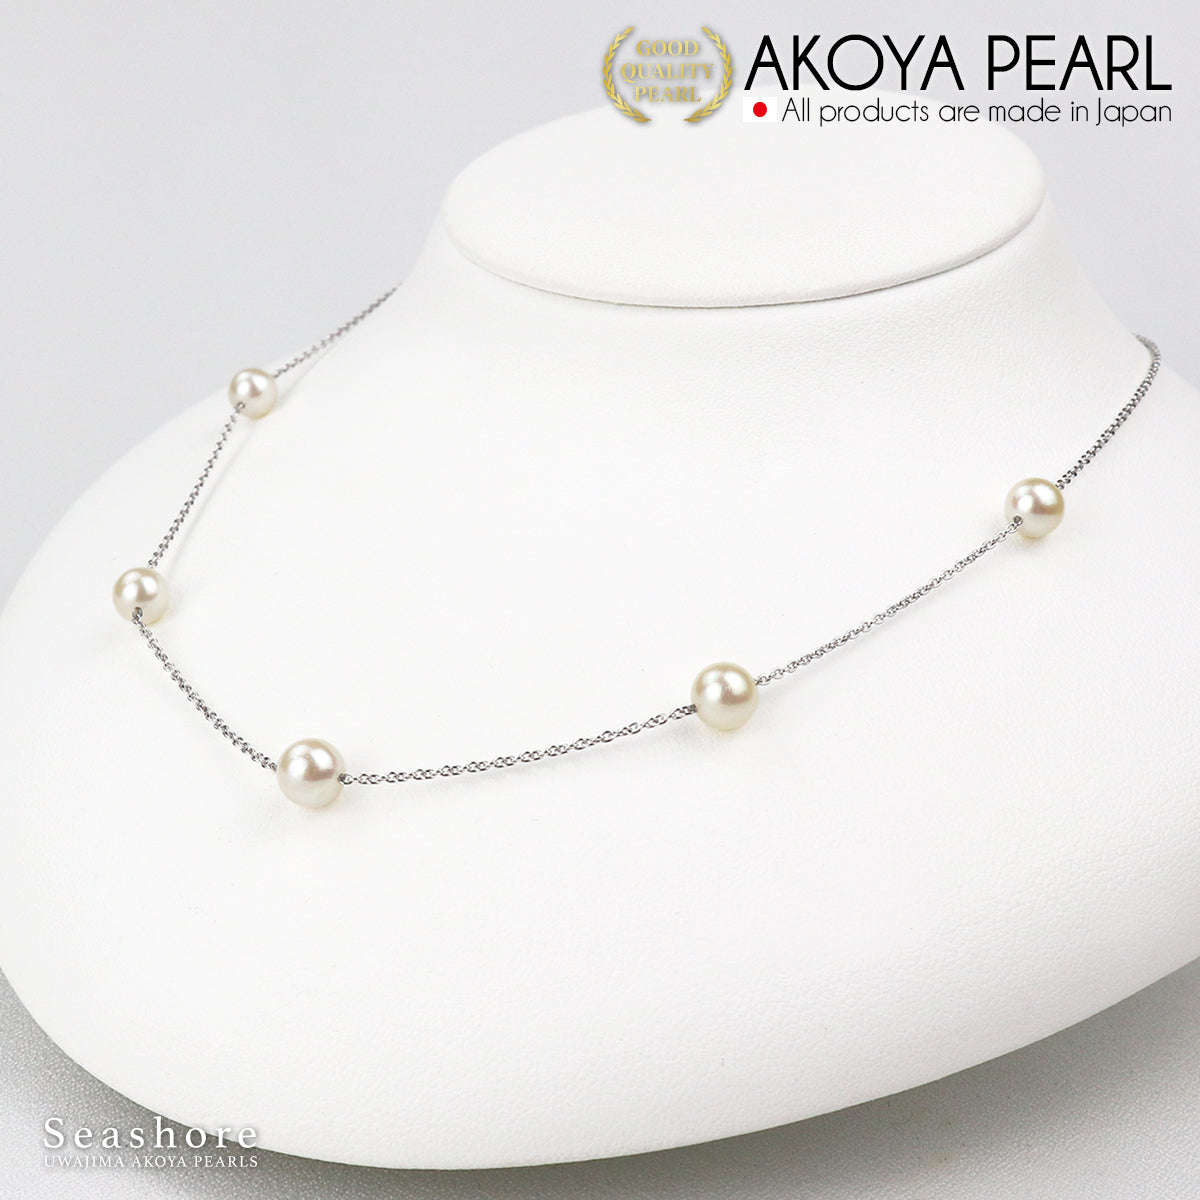 5 Akoya Pearls Necklace Station White [6.0-6.5mm] SV925 Red Bean Chain Akoya Pearl Necklace (3852)